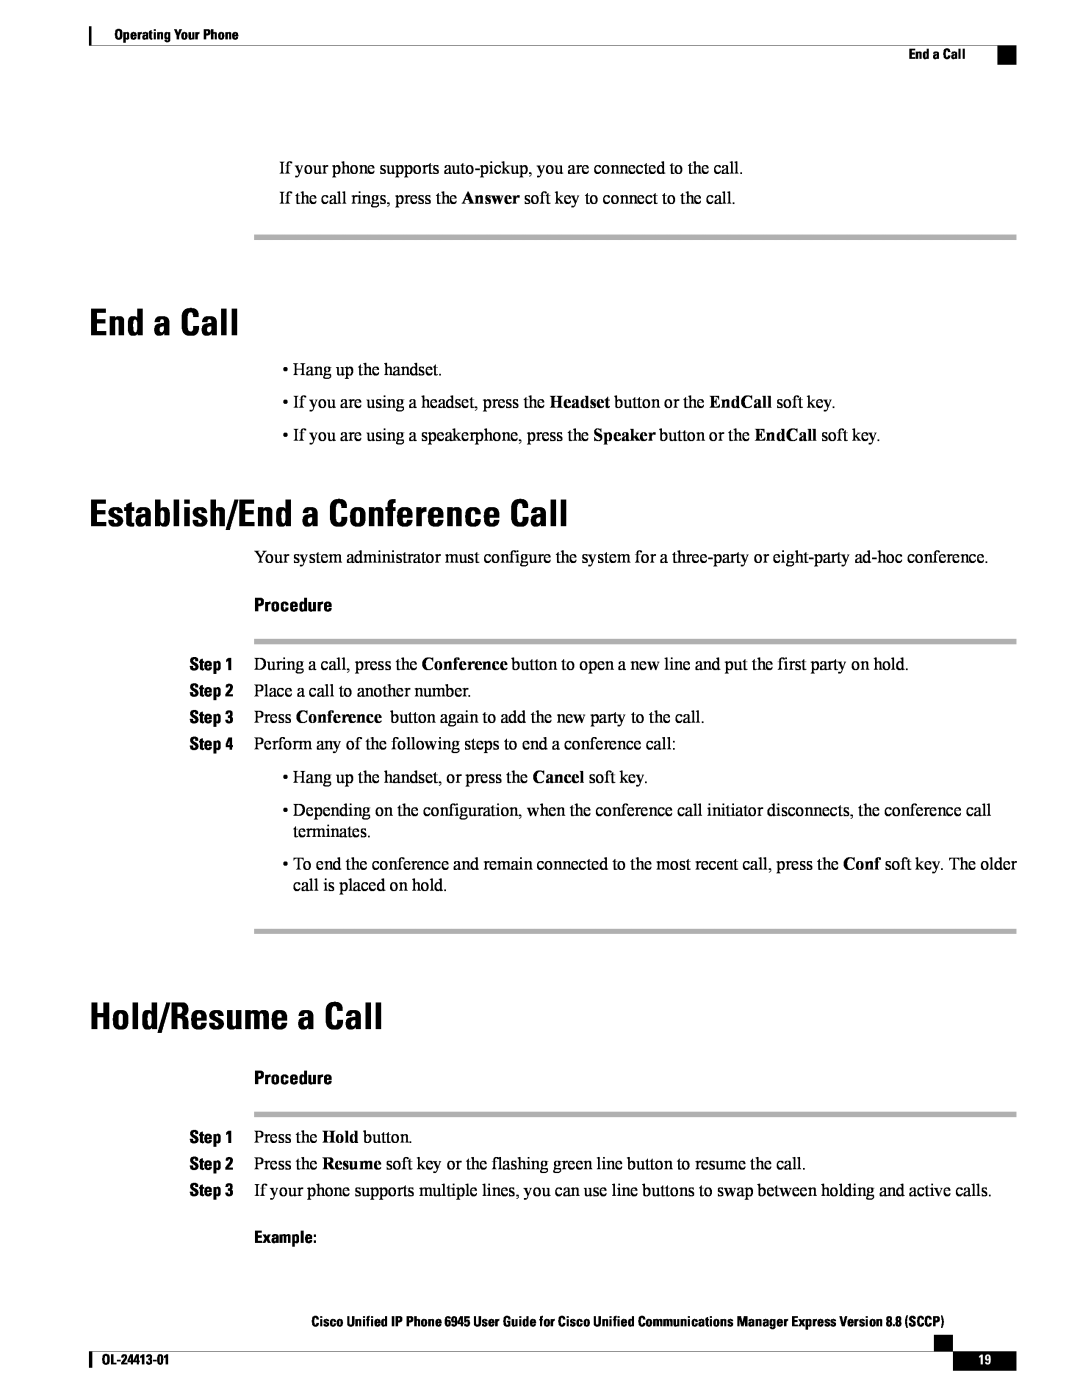 Cisco Systems 6945 manual End a Call, Establish/End a Conference Call, Hold/Resume a Call, Procedure, Example 